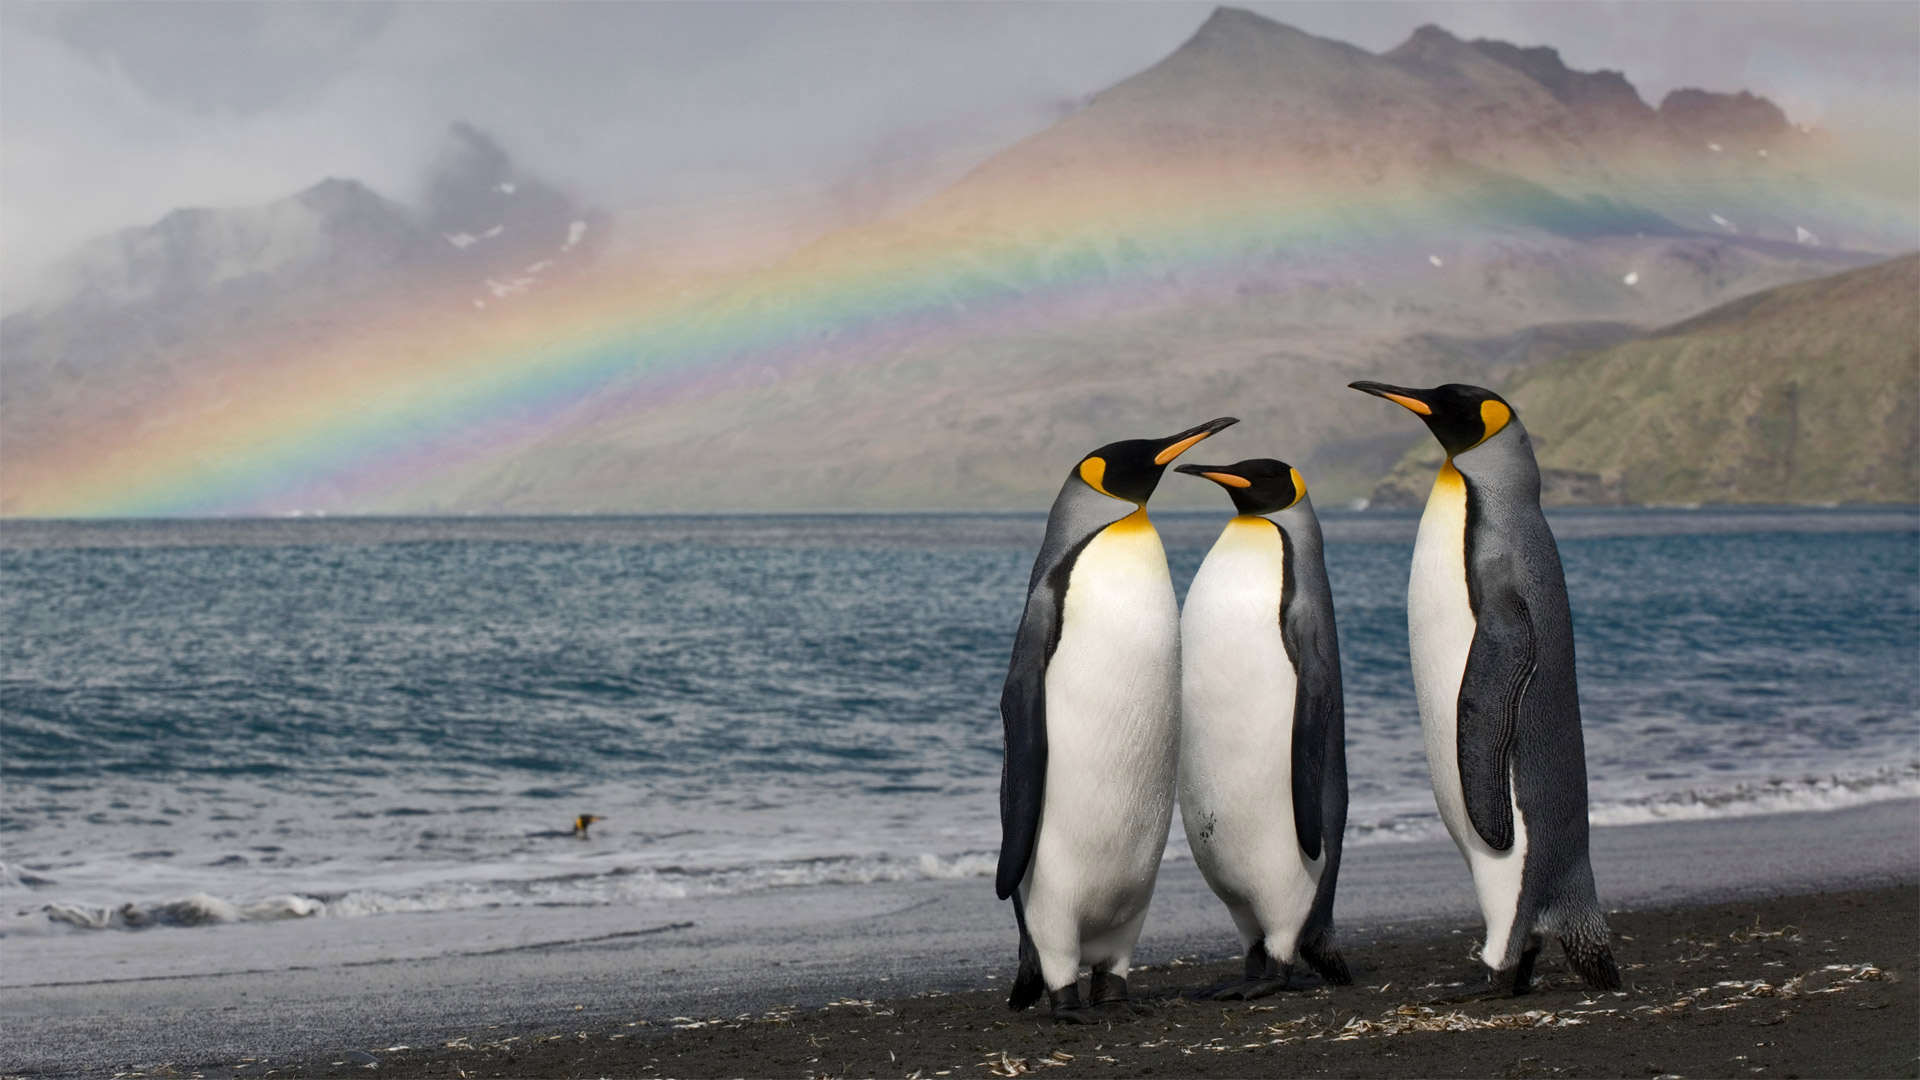 Three king penguins on the shore of St. Andrew's Bay, South Georgia Island - Paul Souders/Getty Images)